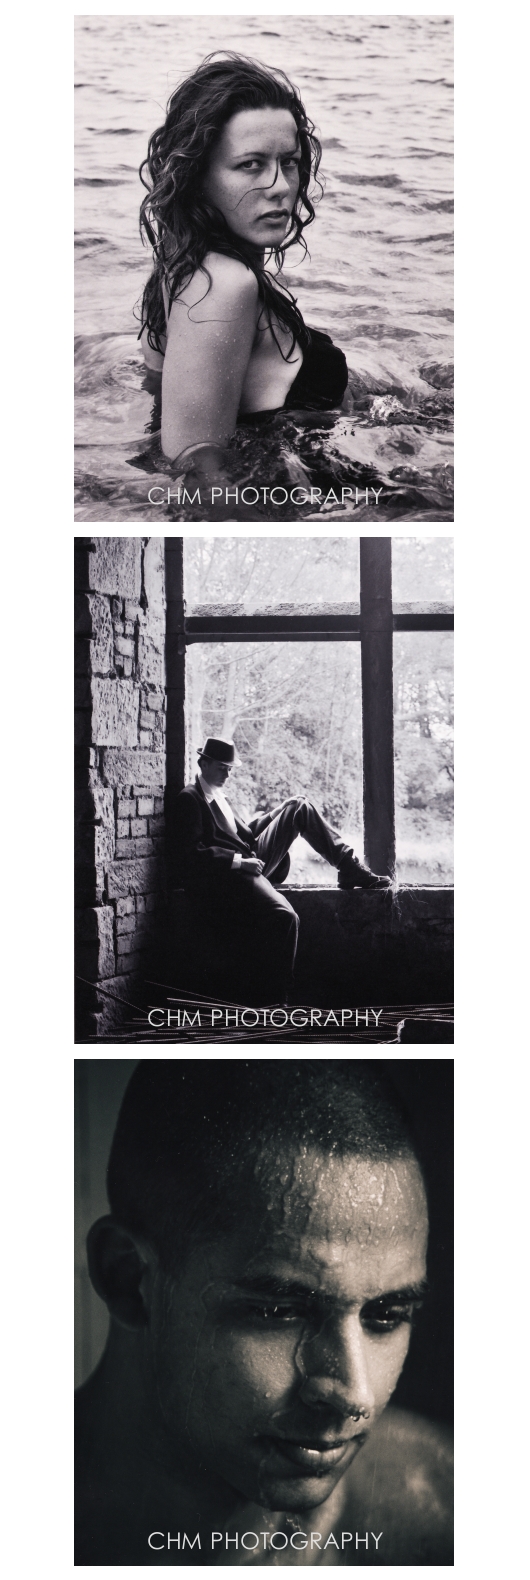 Male model photo shoot of CHM Photography and AS2015 in Greece, Renfrewshire, Sydney